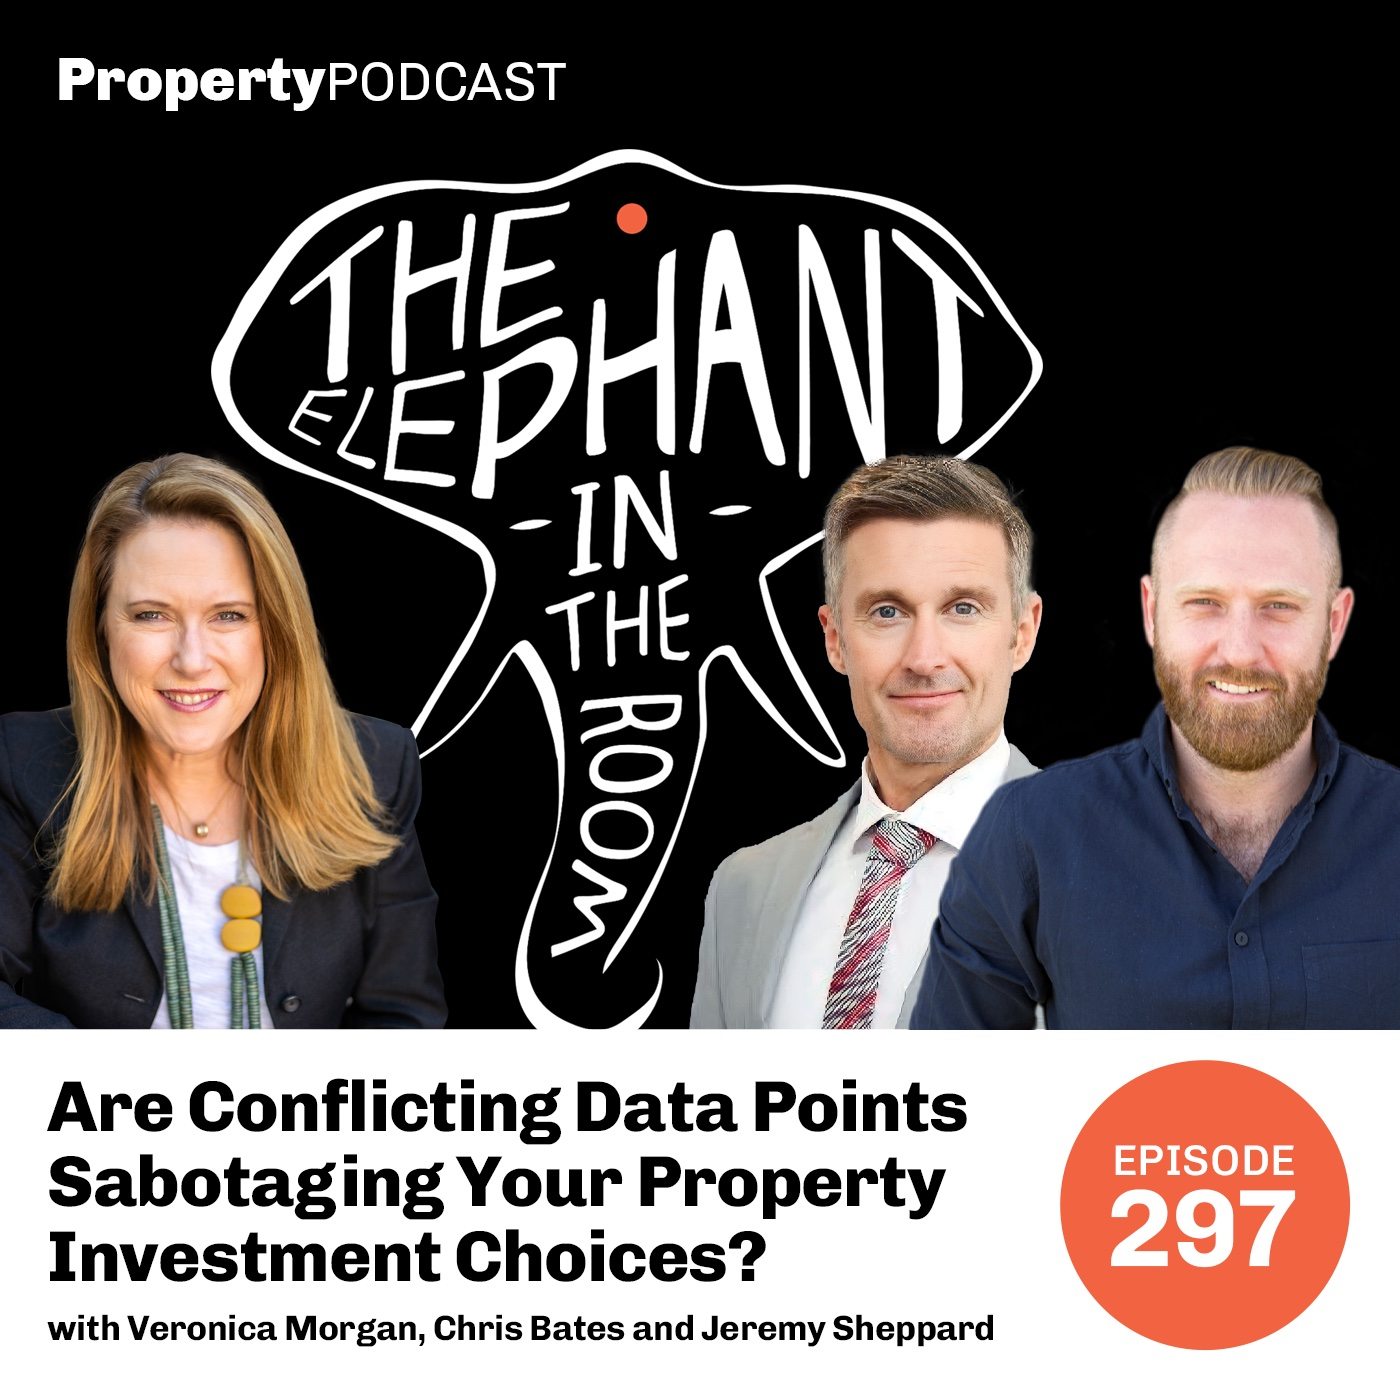 Are Conflicting Data Points Sabotaging Your Property Investment Choices?